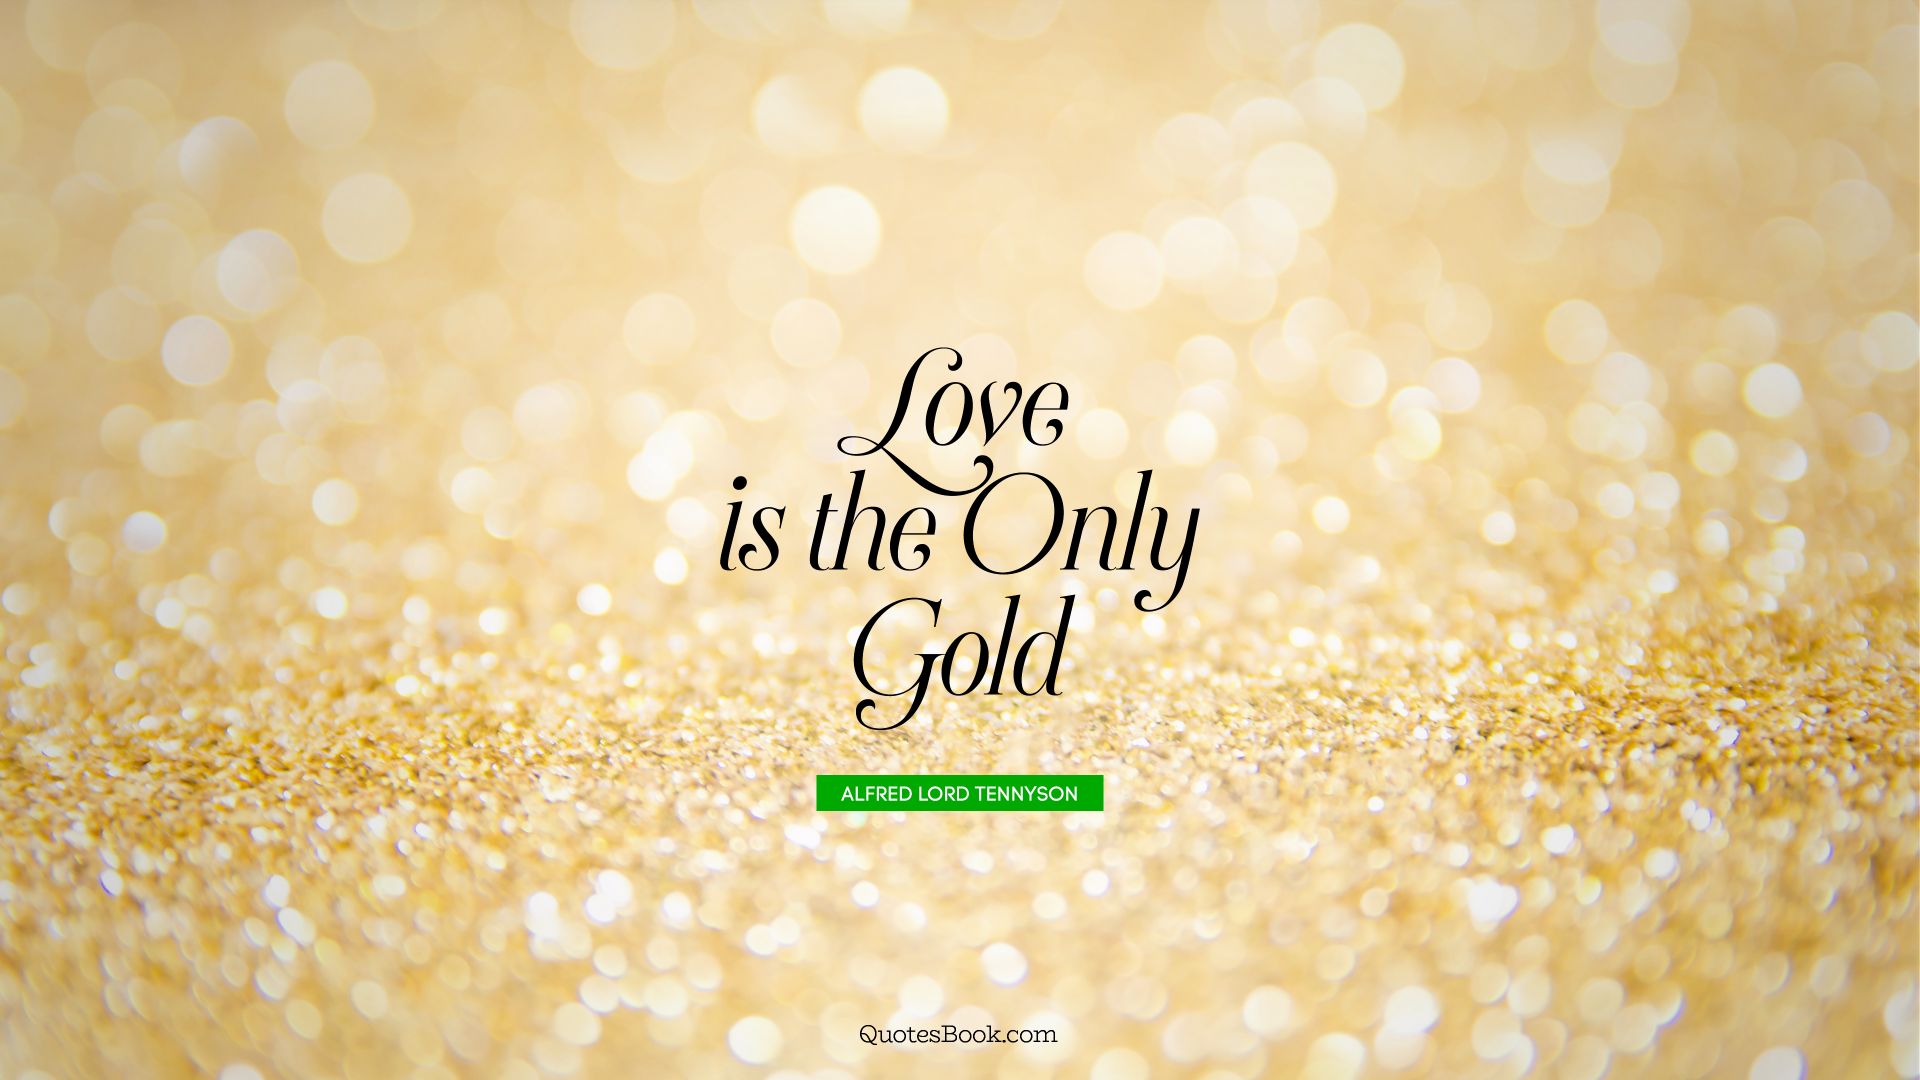 Love is the only gold. - Quote by Alfred Lord Tennyson